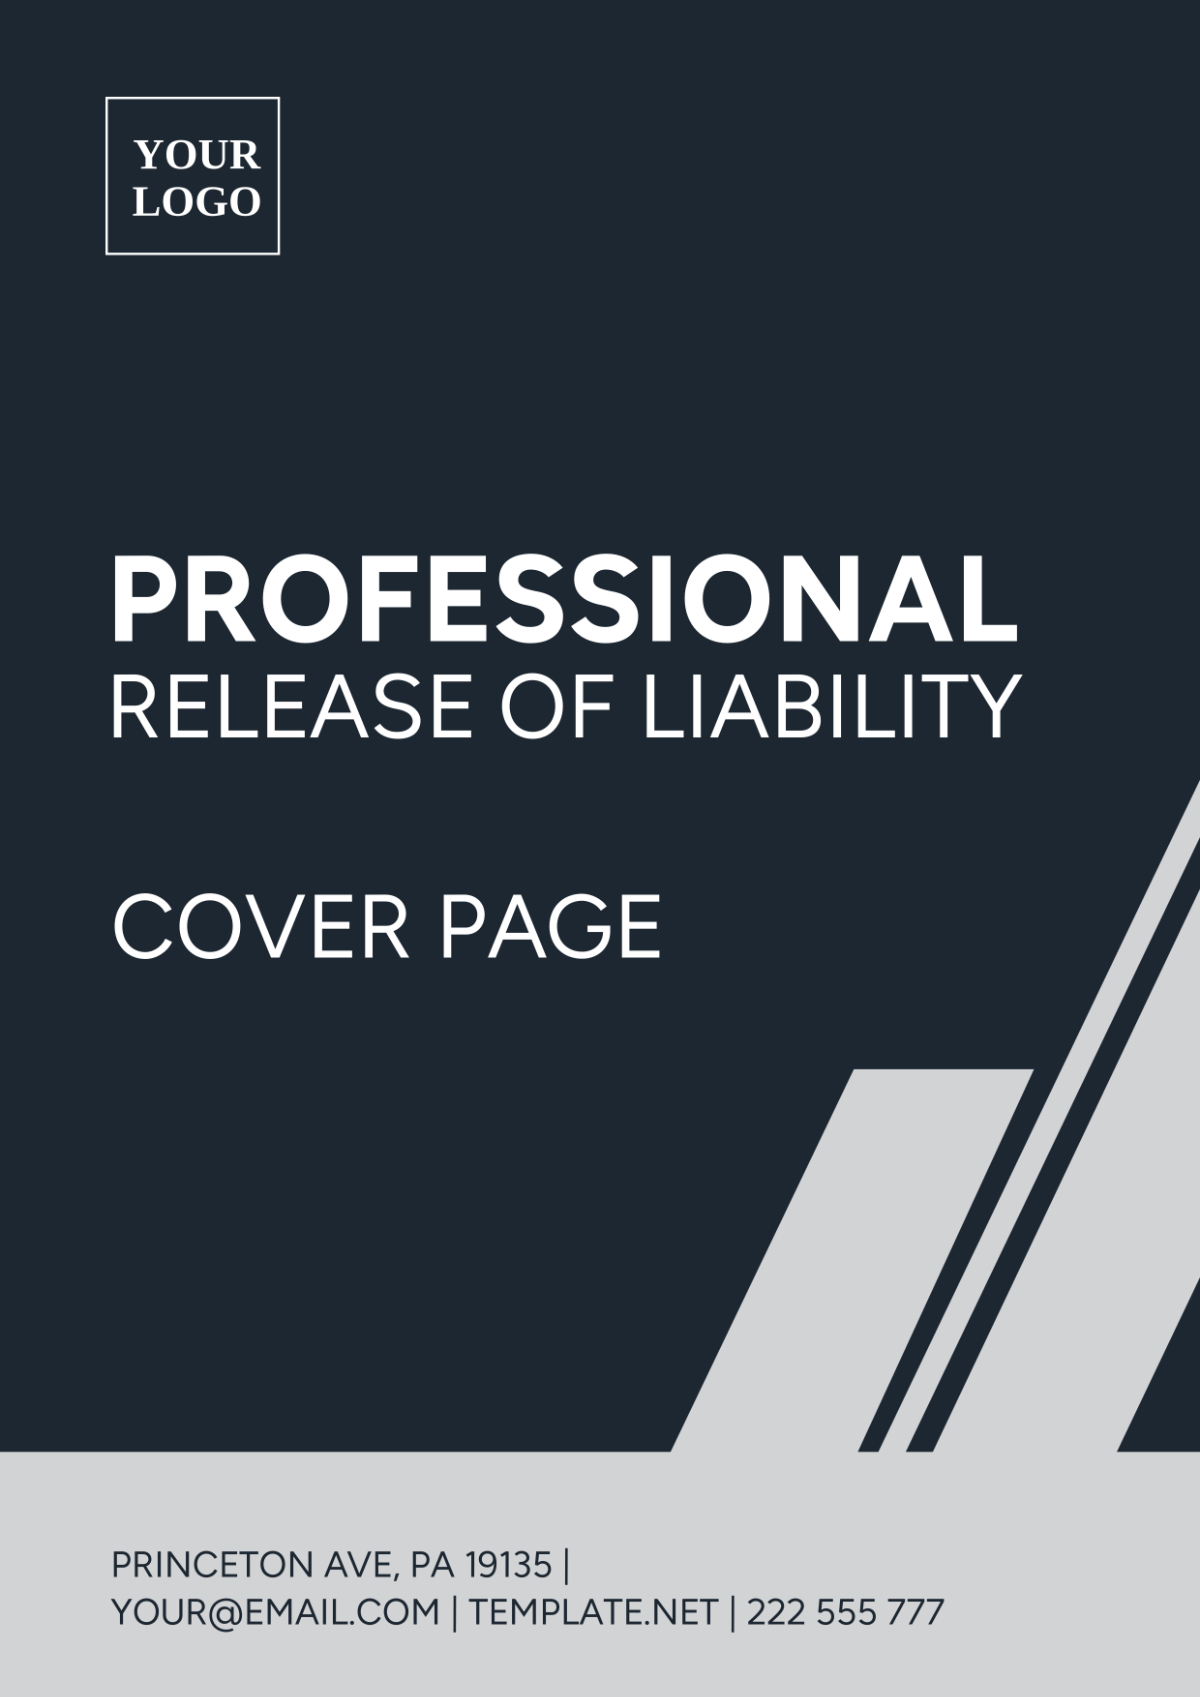 Professional Release of Liability Cover Page